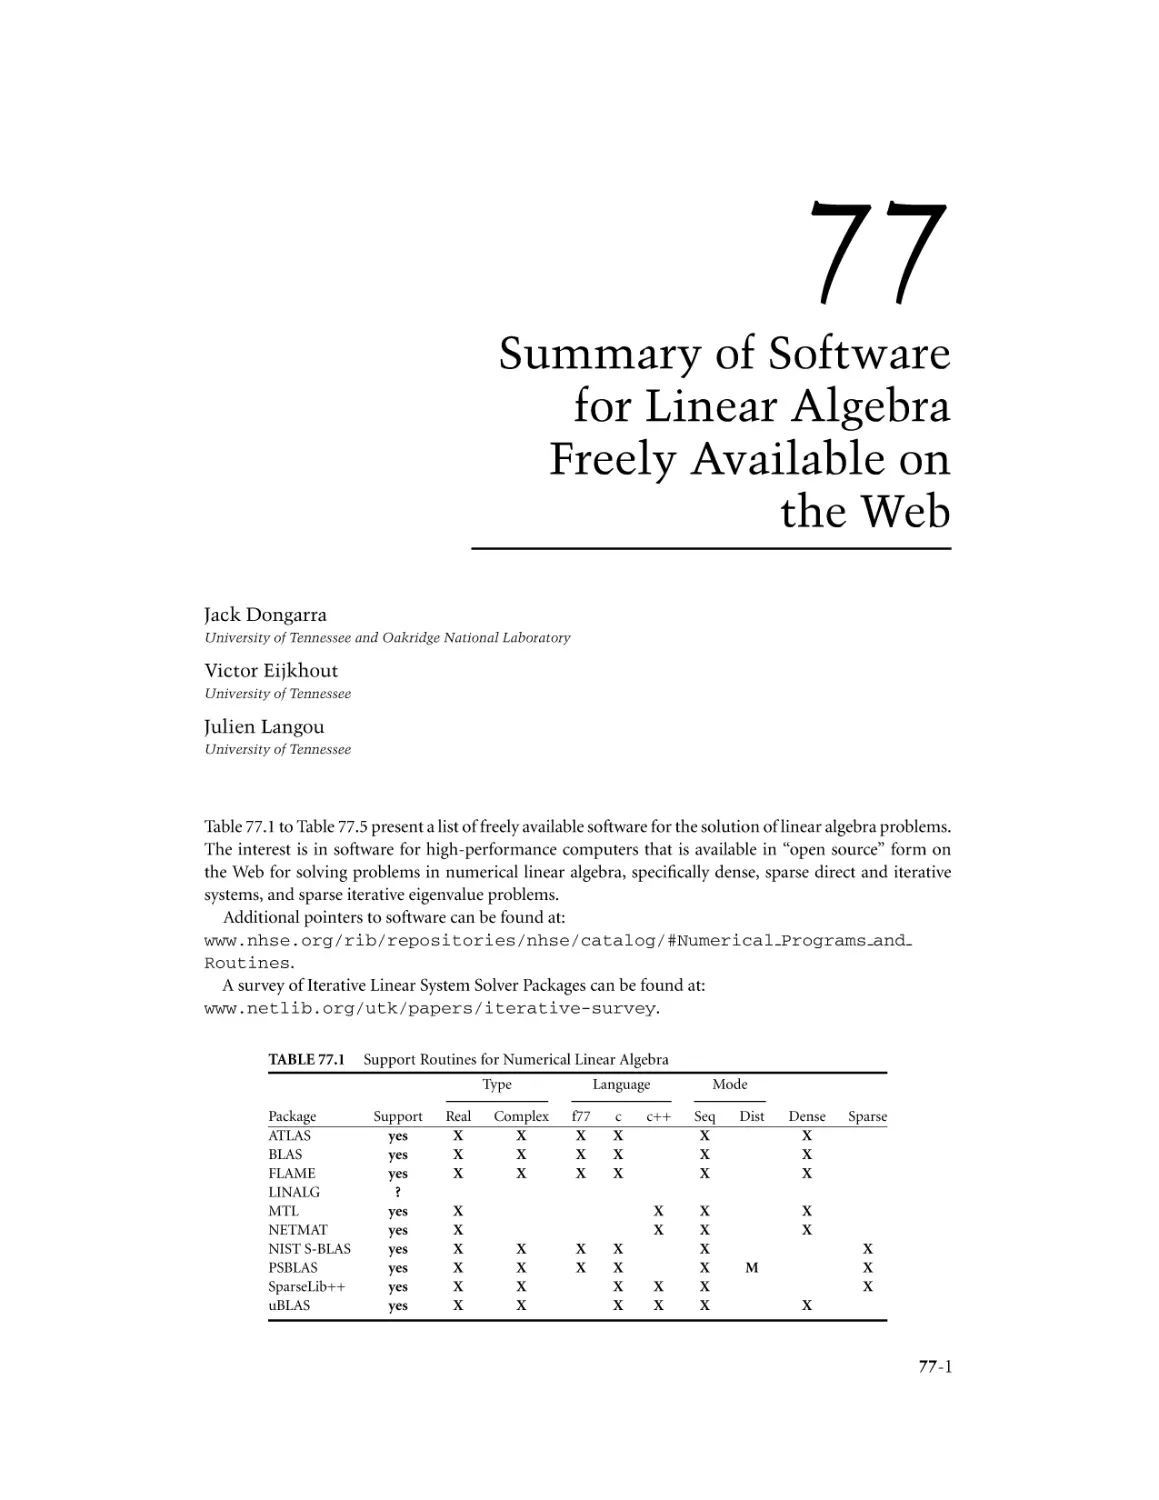 Chapter 77. Summary of Software for Linear Algebra Freely Available on the Web